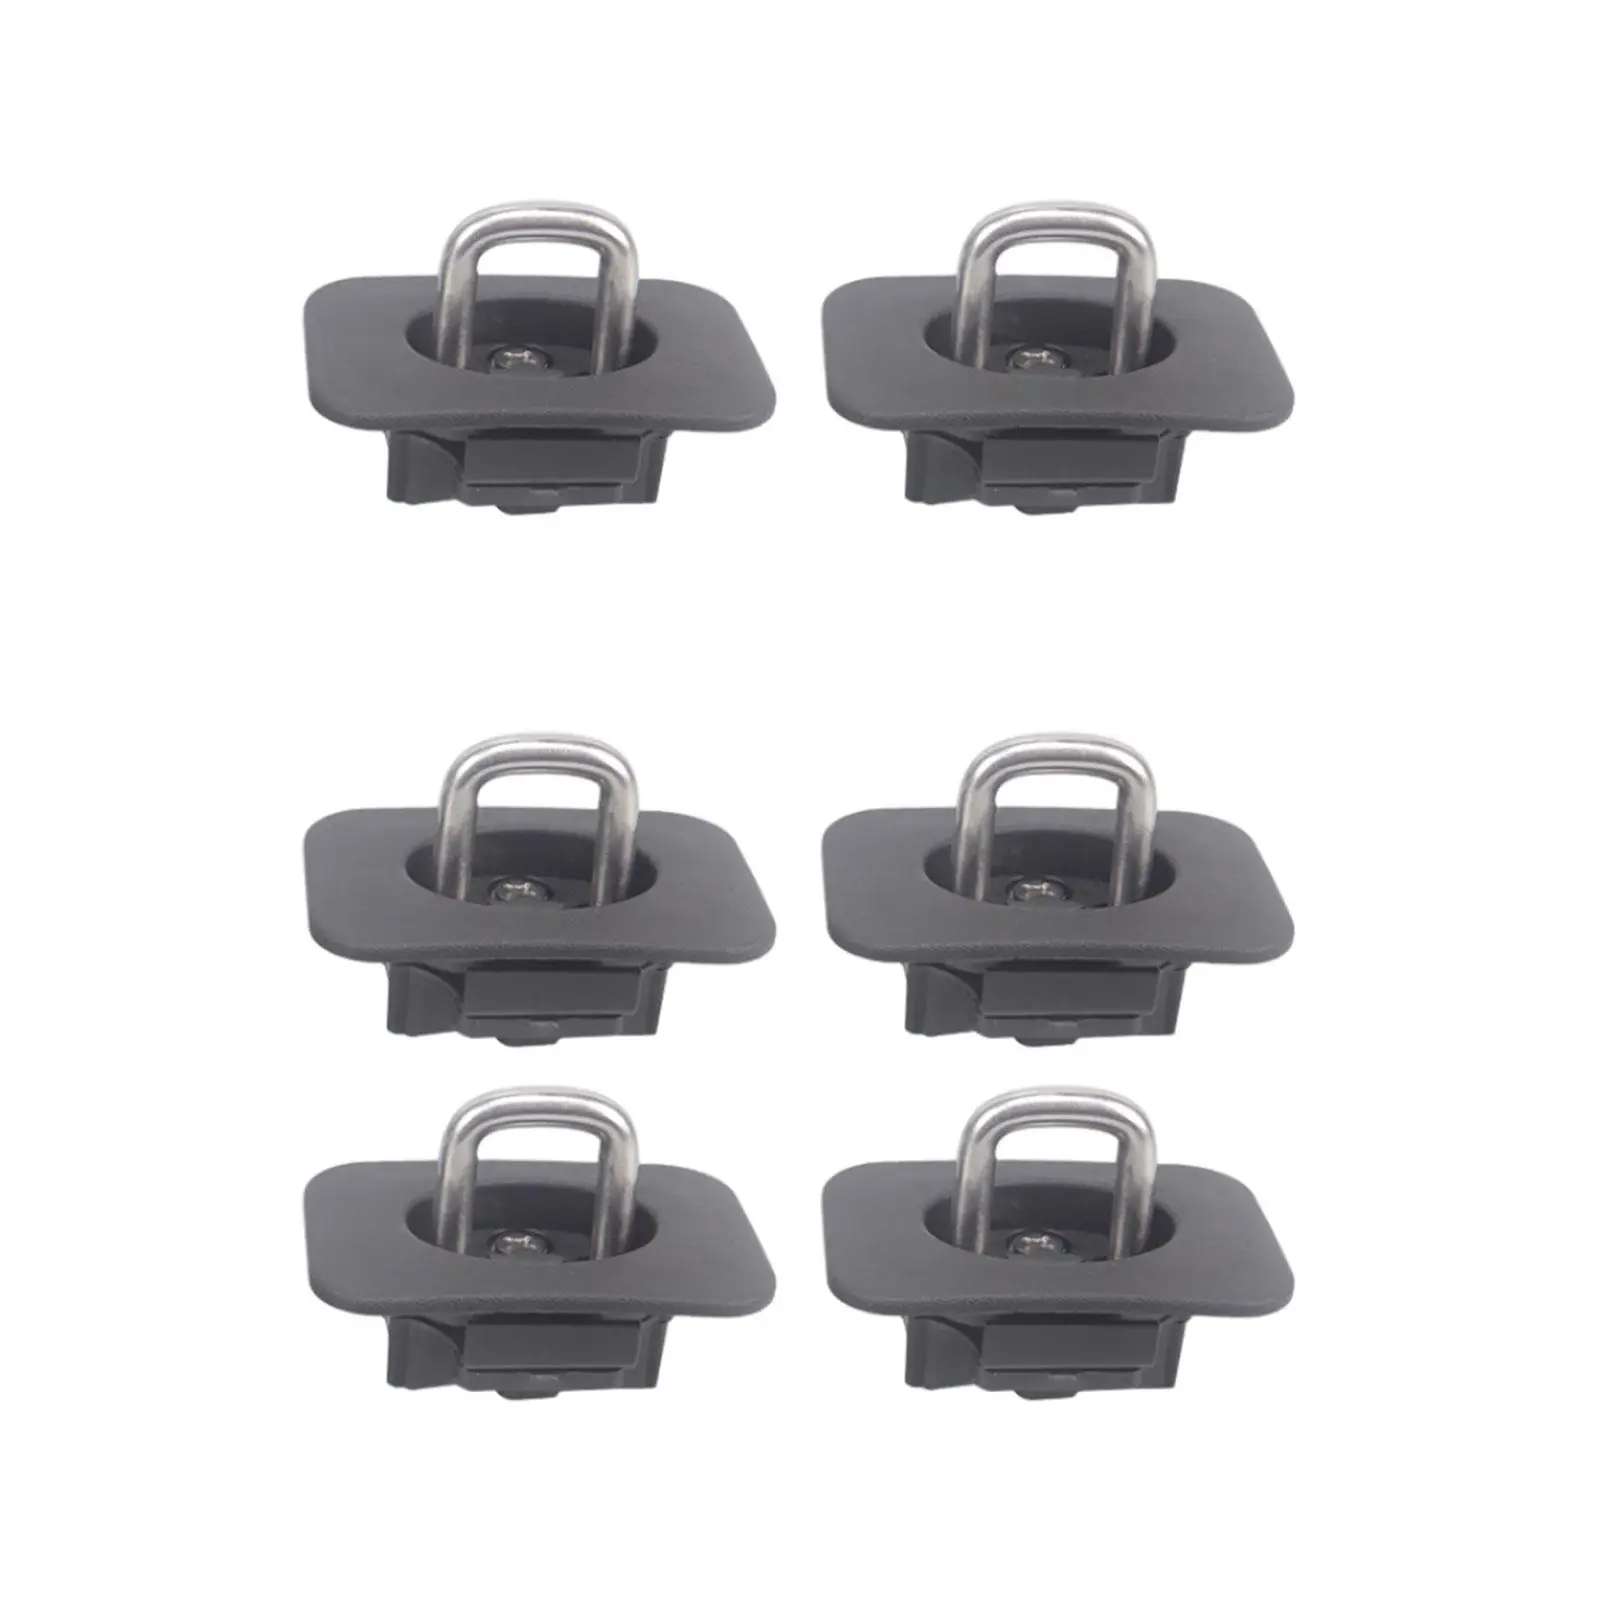 Truck Bed Tie Down Anchors Practical Wall Anchors for 98-14